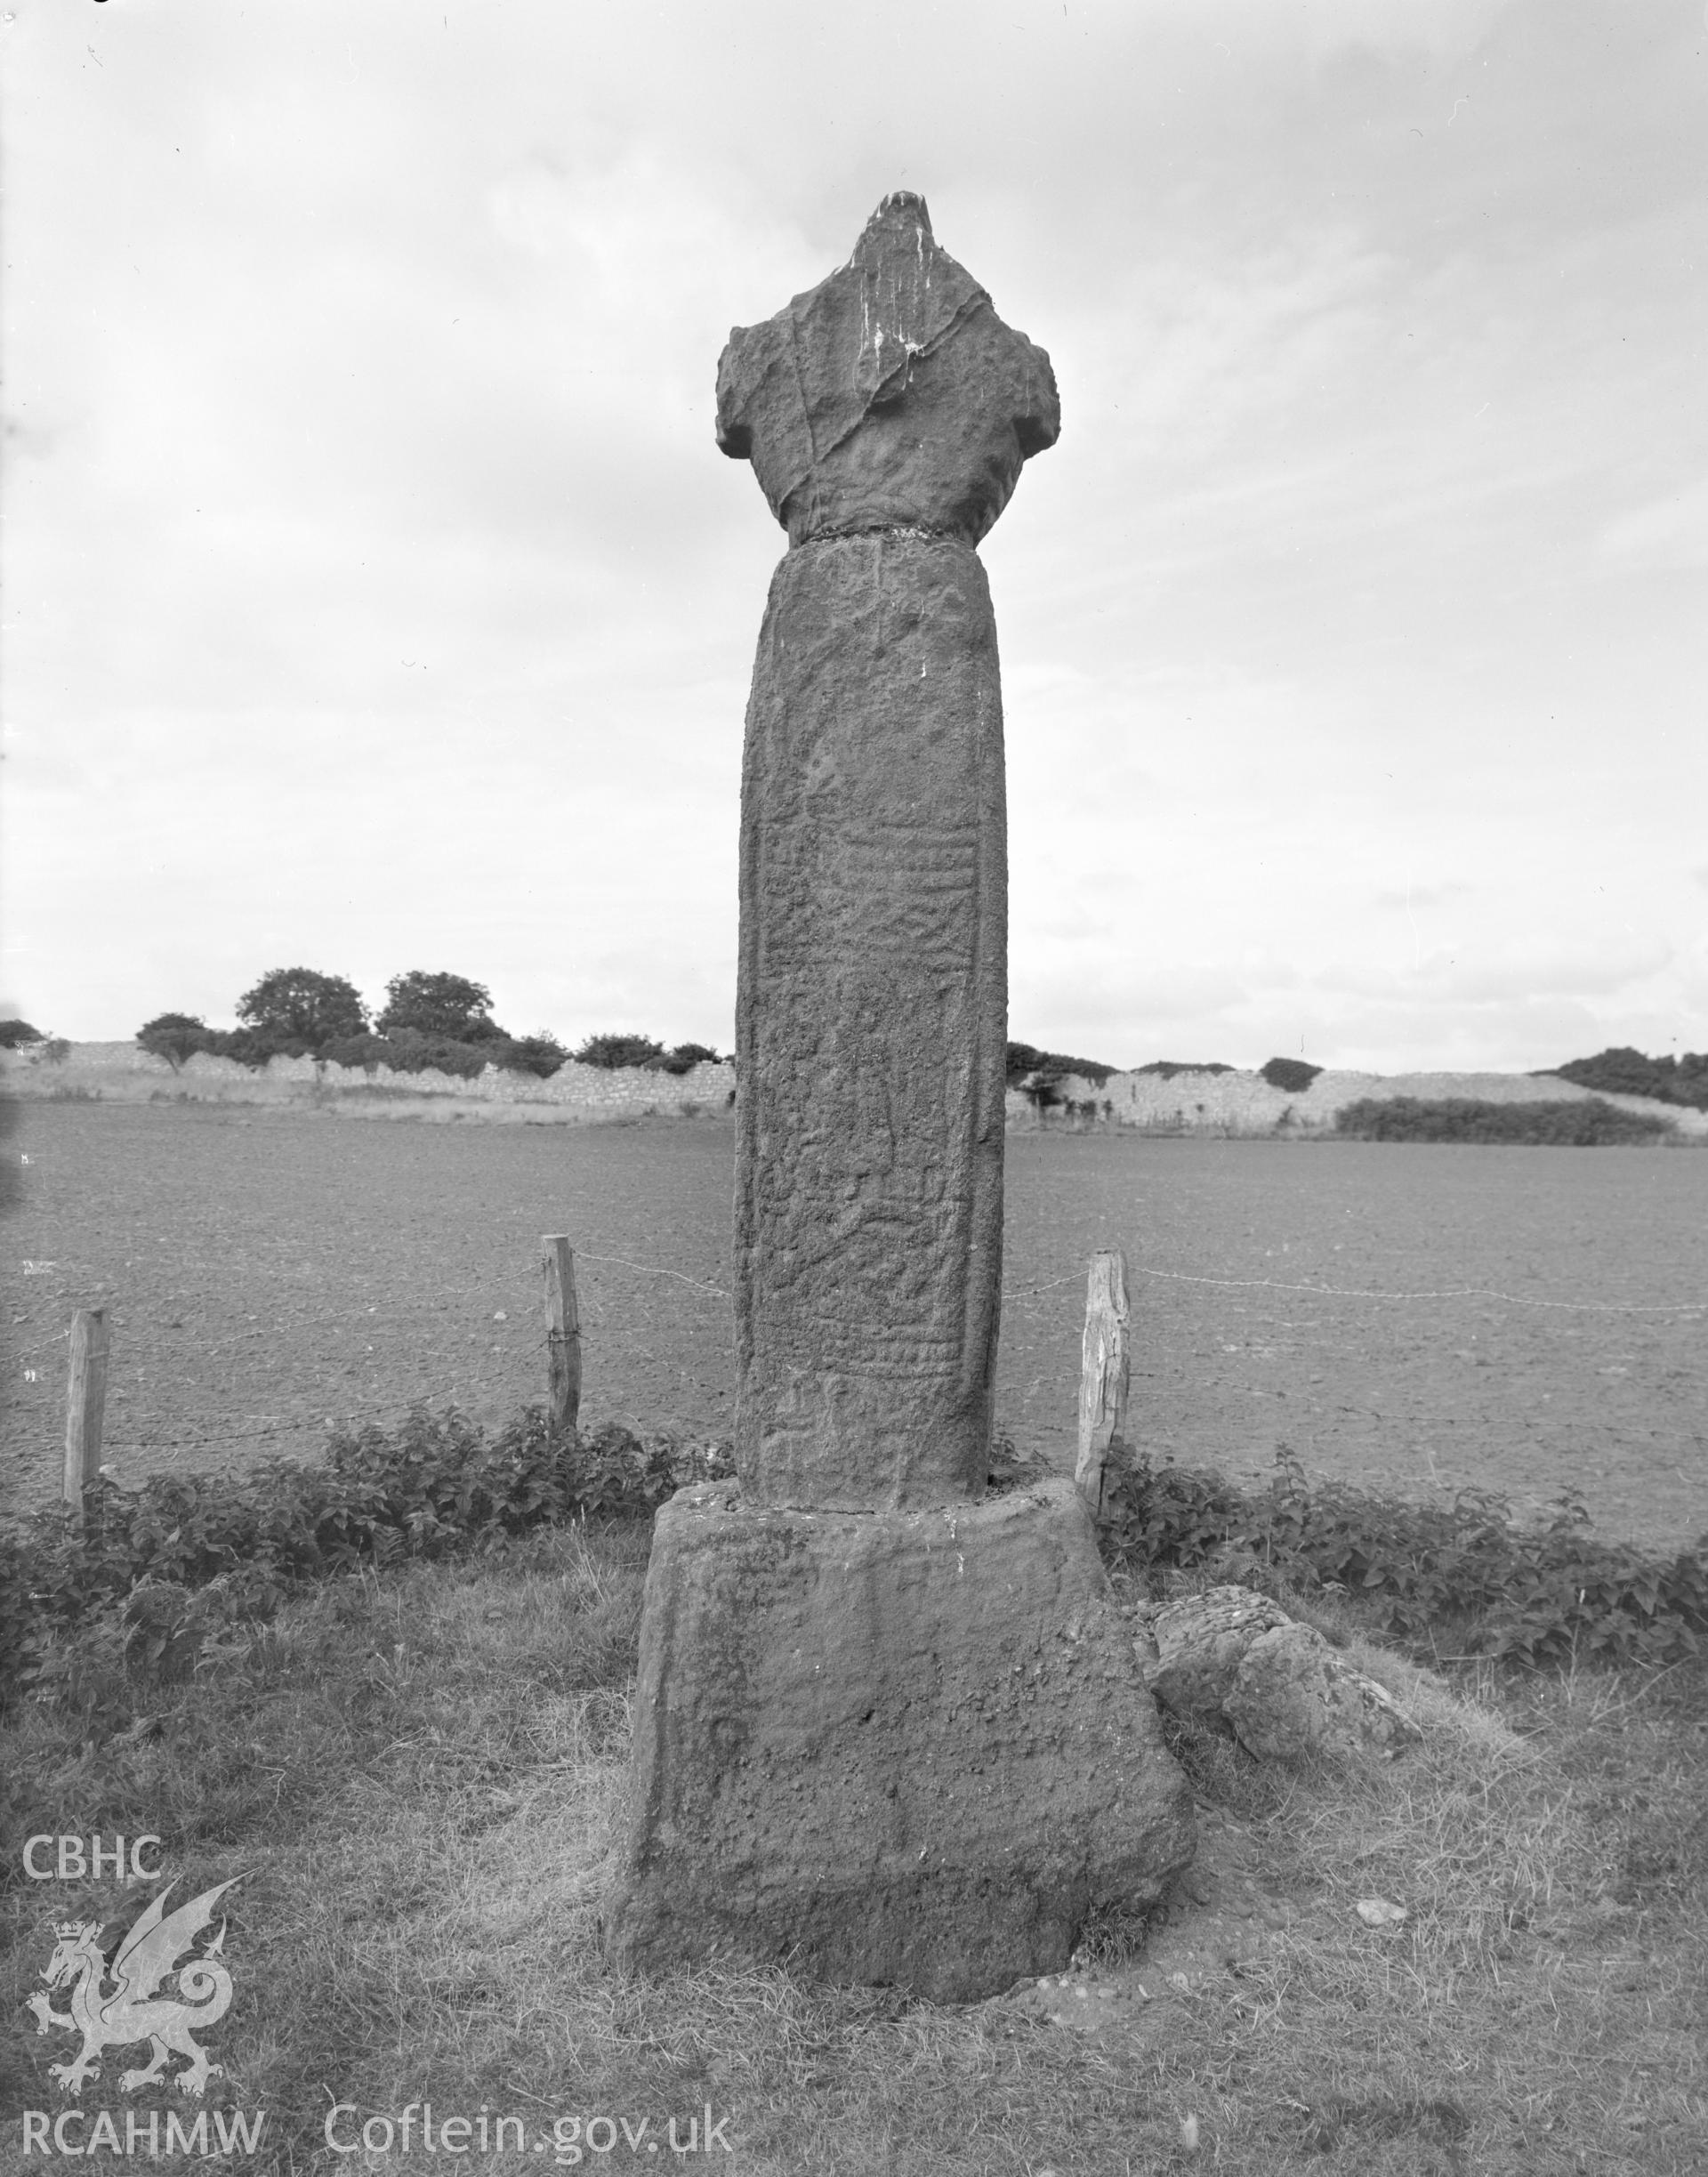 Digital copy of a black and white negative showing of Penmon Cross taken by Department of Environment, 1976.